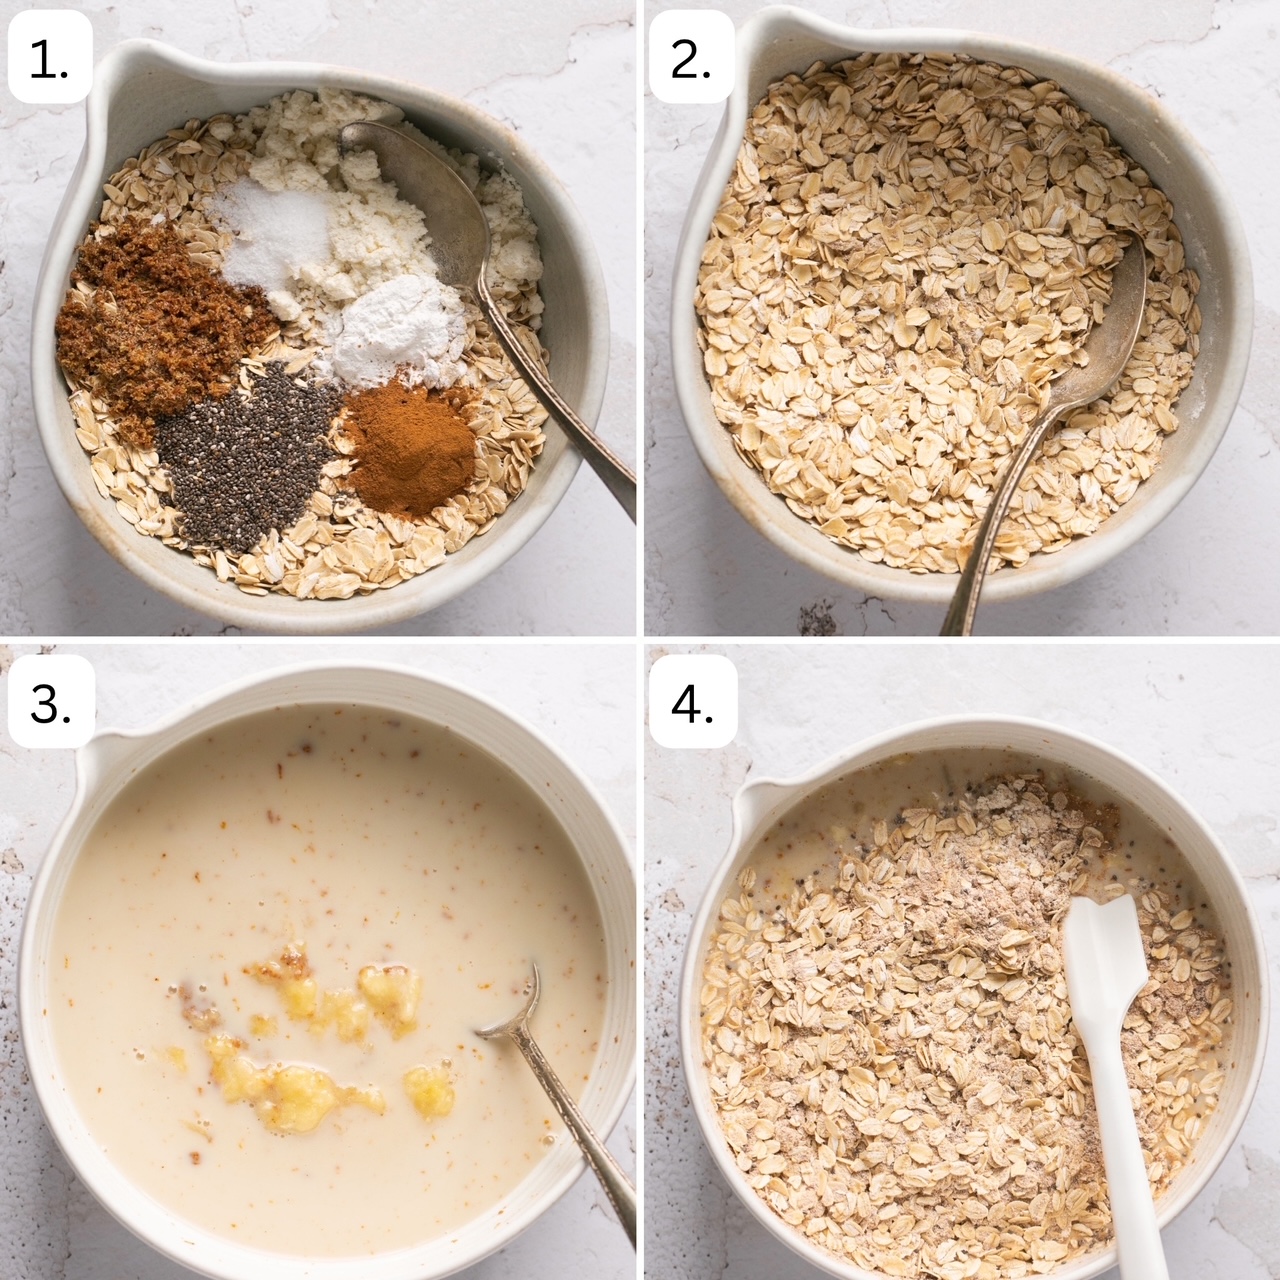 numbered step by step photos showing how to make vegan baked oats